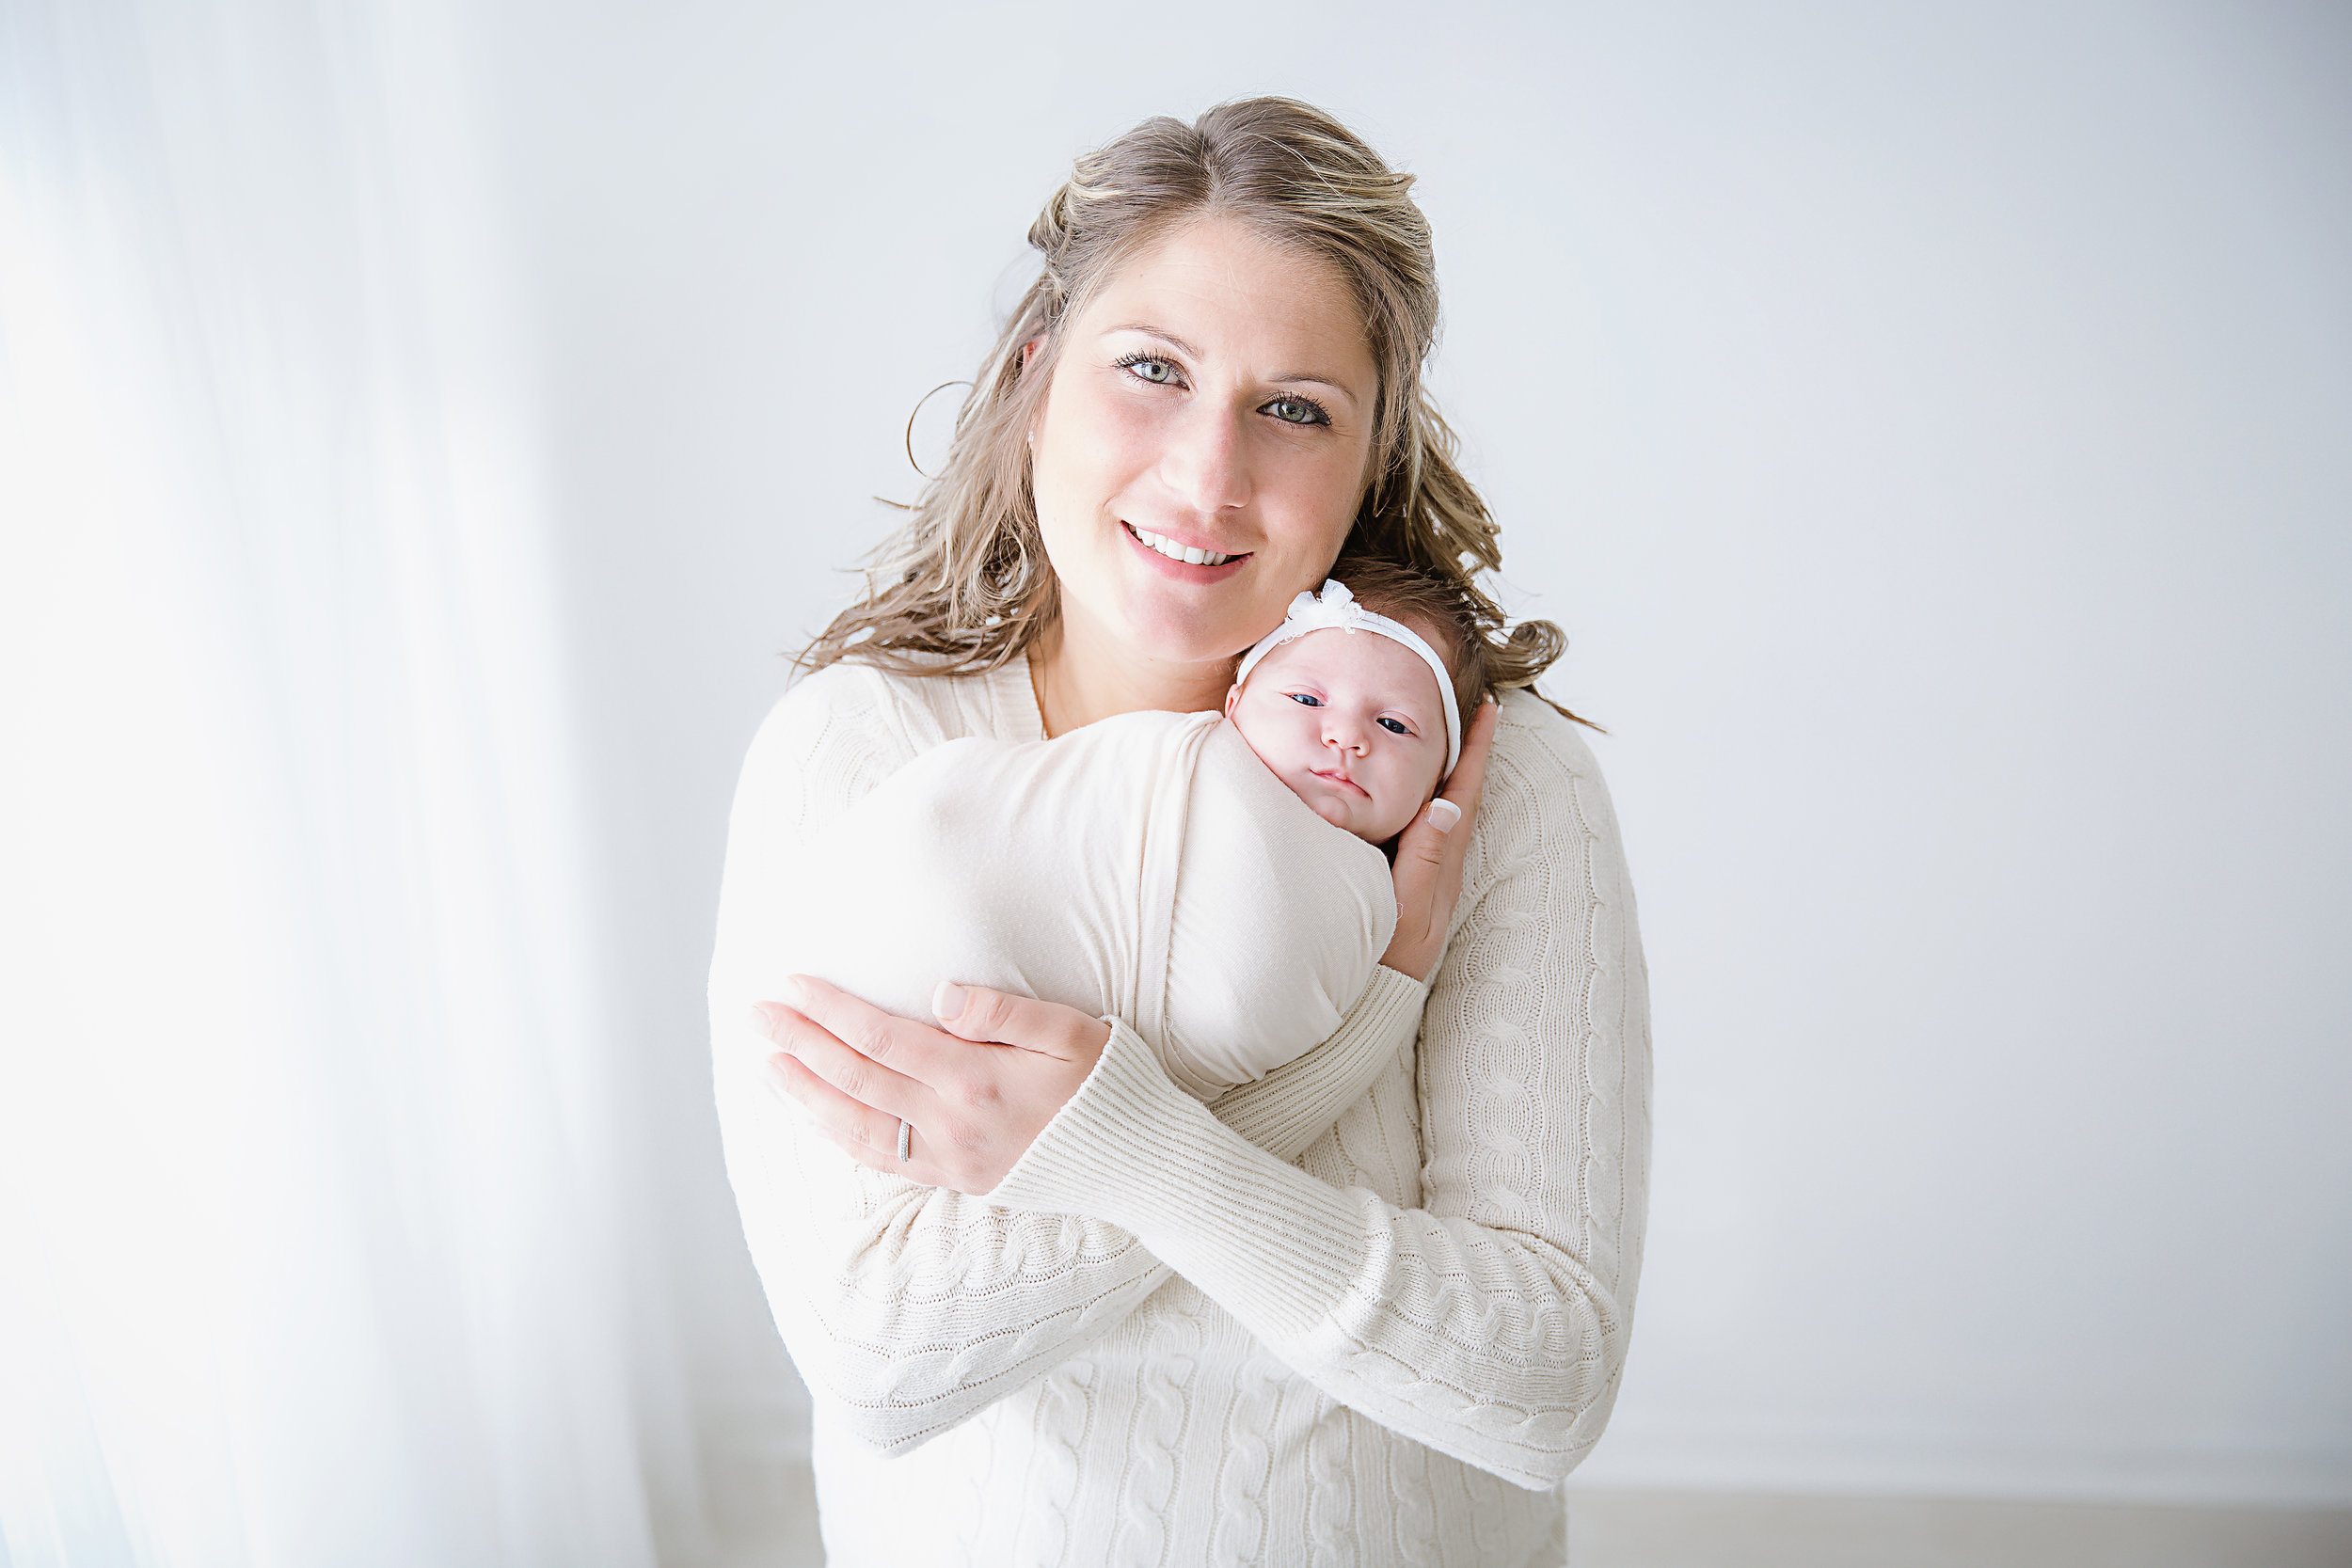 mommy-newborn-baby-girl-daughter-embracing-and-smiling-photography-shoot-burlington-new-jersey